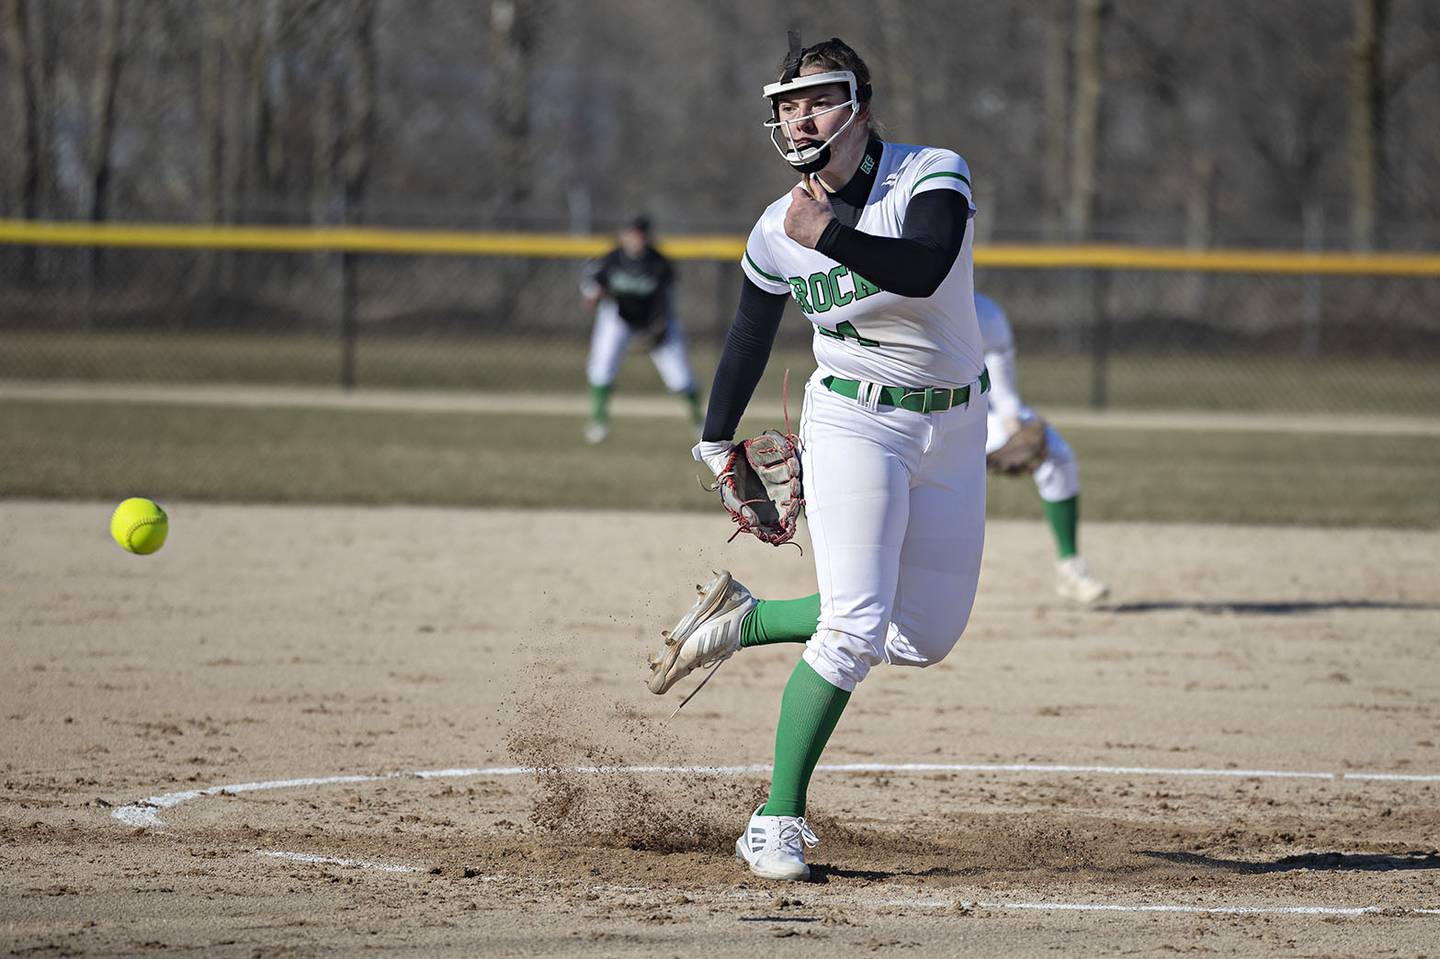 Rock Falls’ Katie Thatcher fires a pitch against Geneseo Wednesday March 29, 2023.